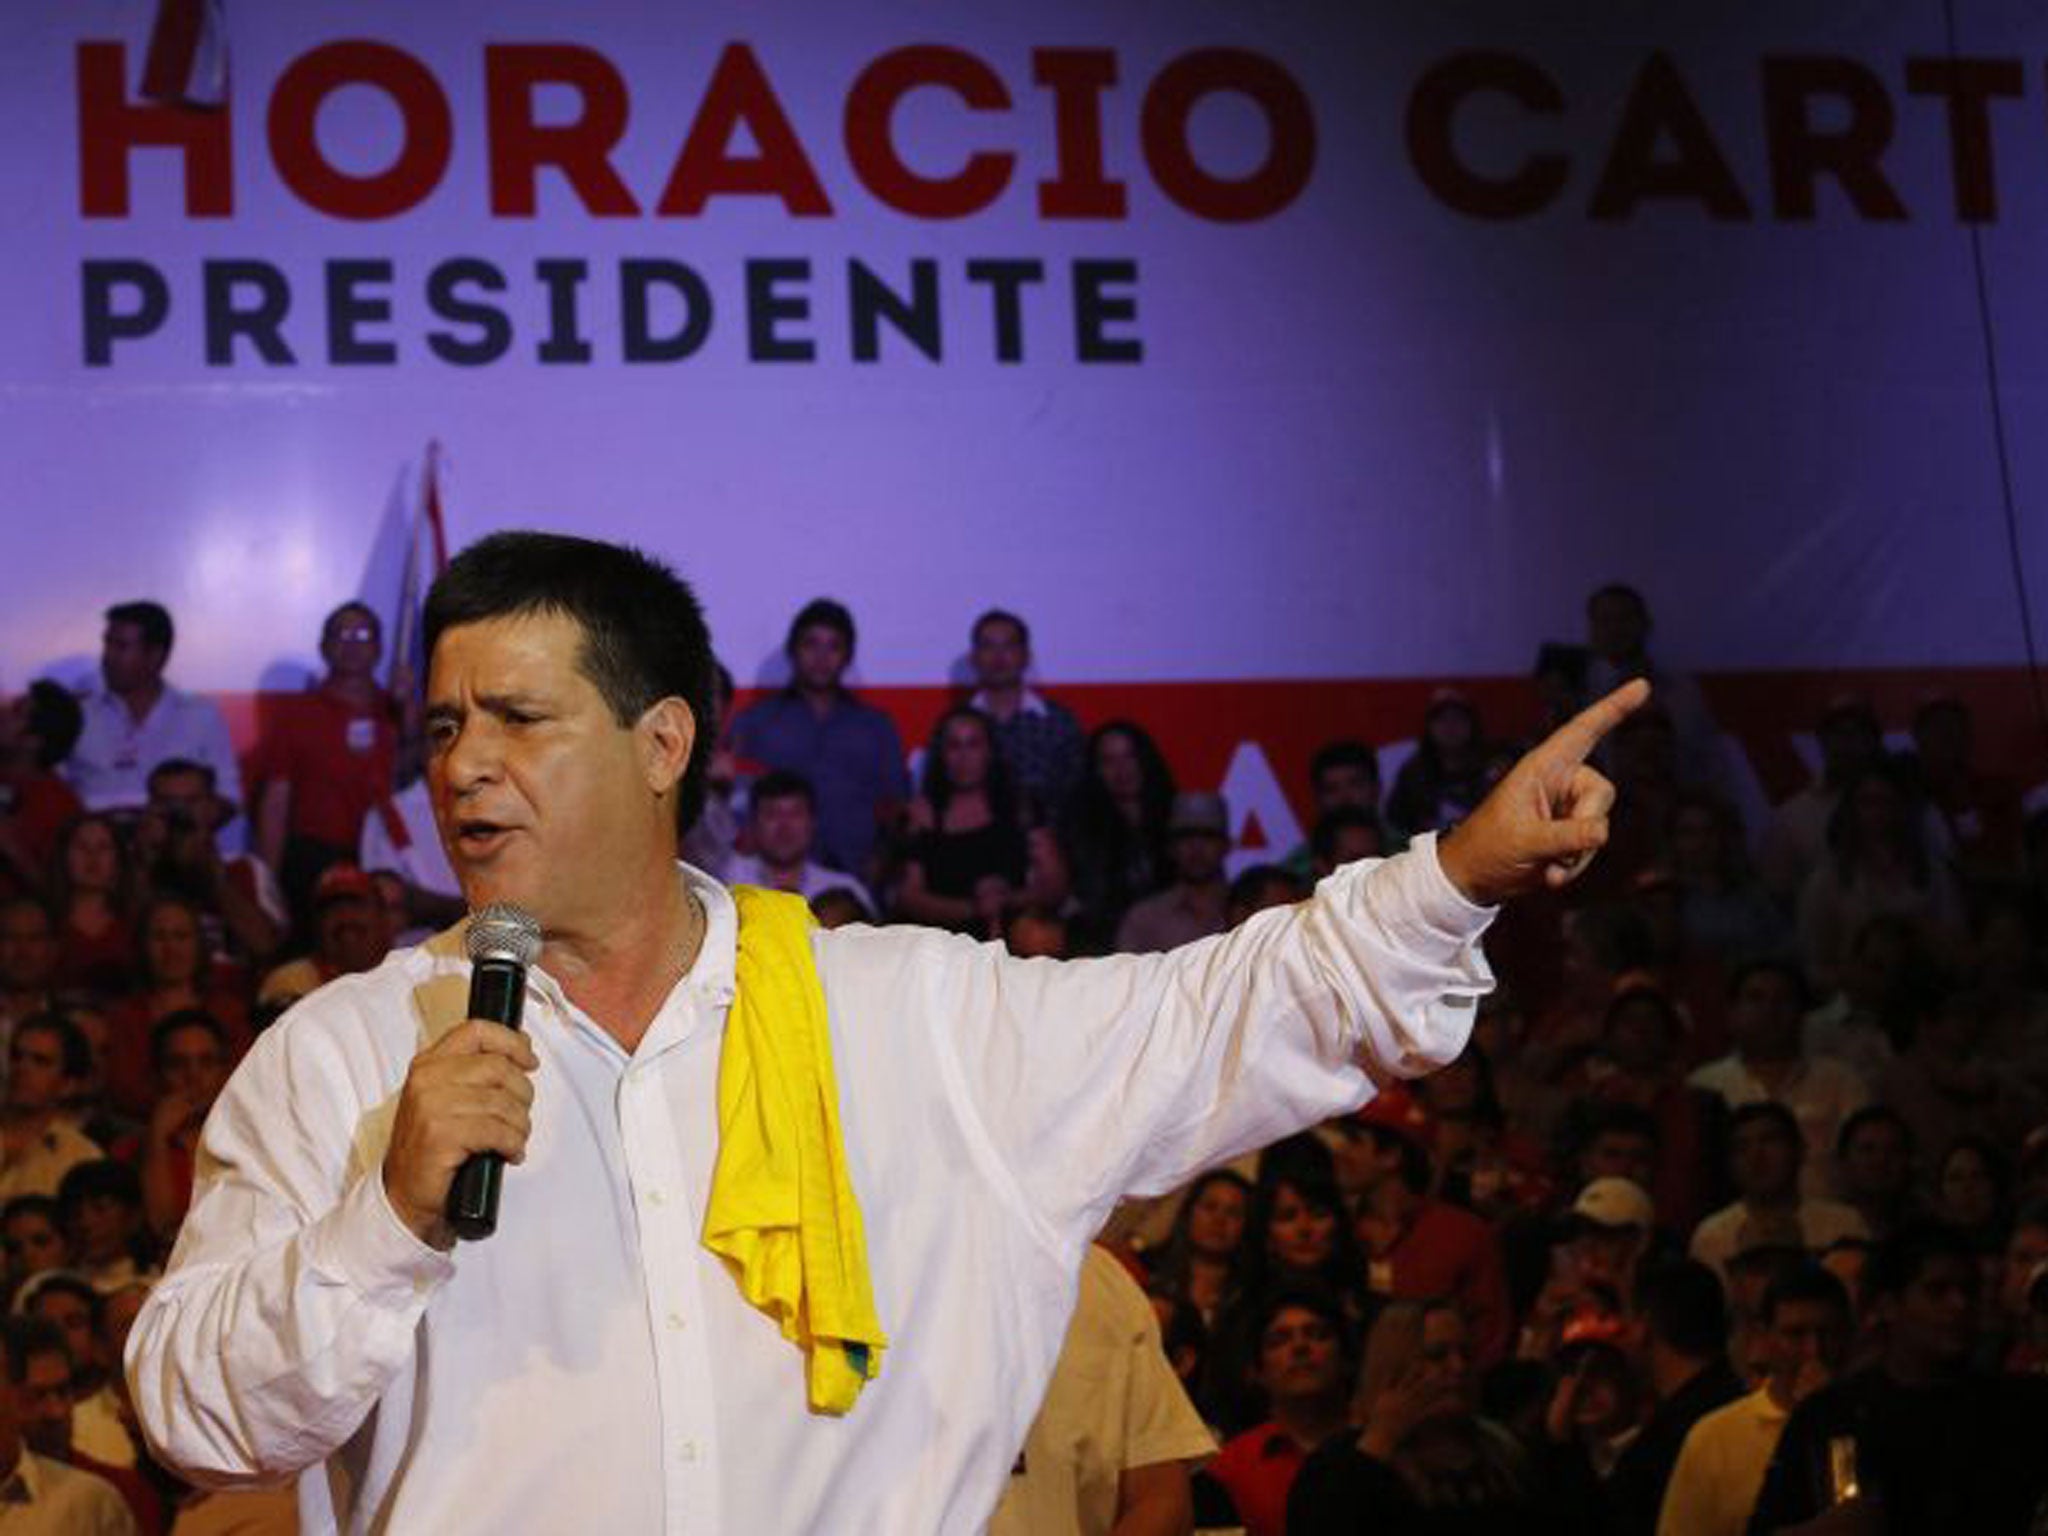 The Paraguayan presidential candidate and businessman, Horacio Cartes, currently leads in the polls